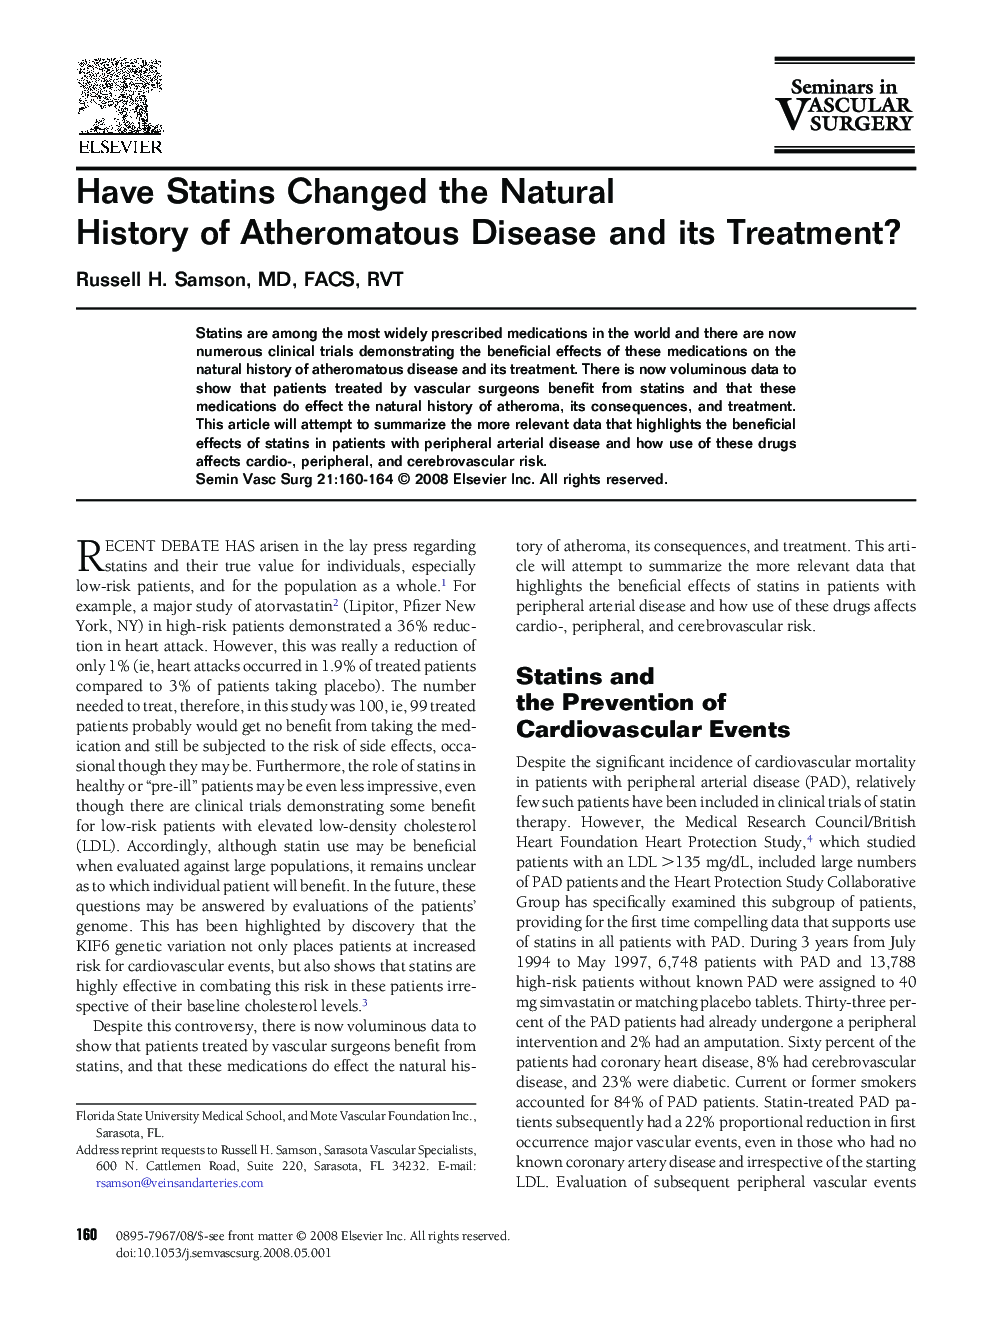 Have Statins Changed the Natural History of Atheromatous Disease and its Treatment?